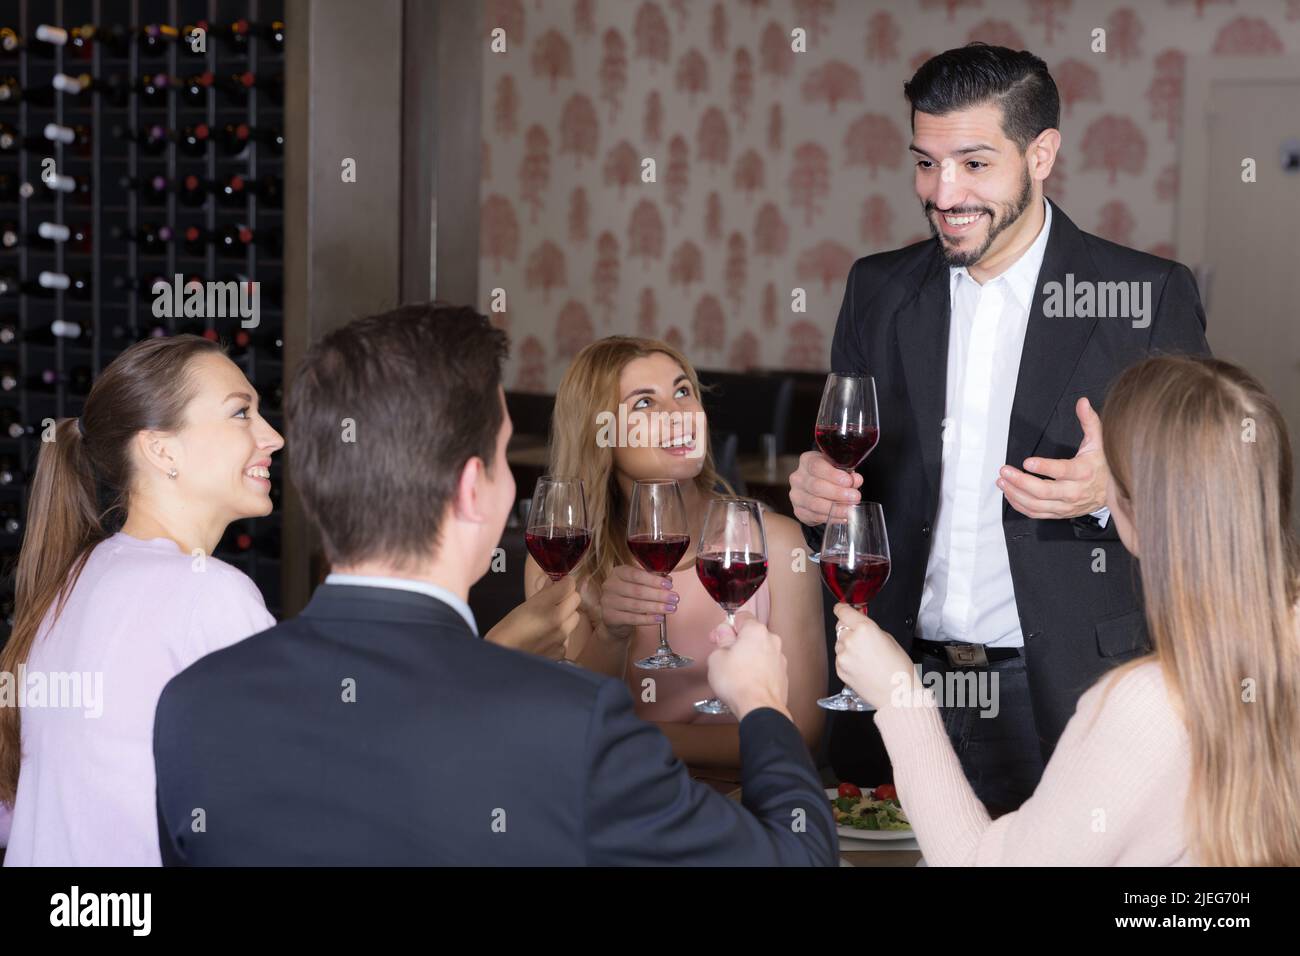 Glad man pronouncing toast in cozy restaurant Stock Photo